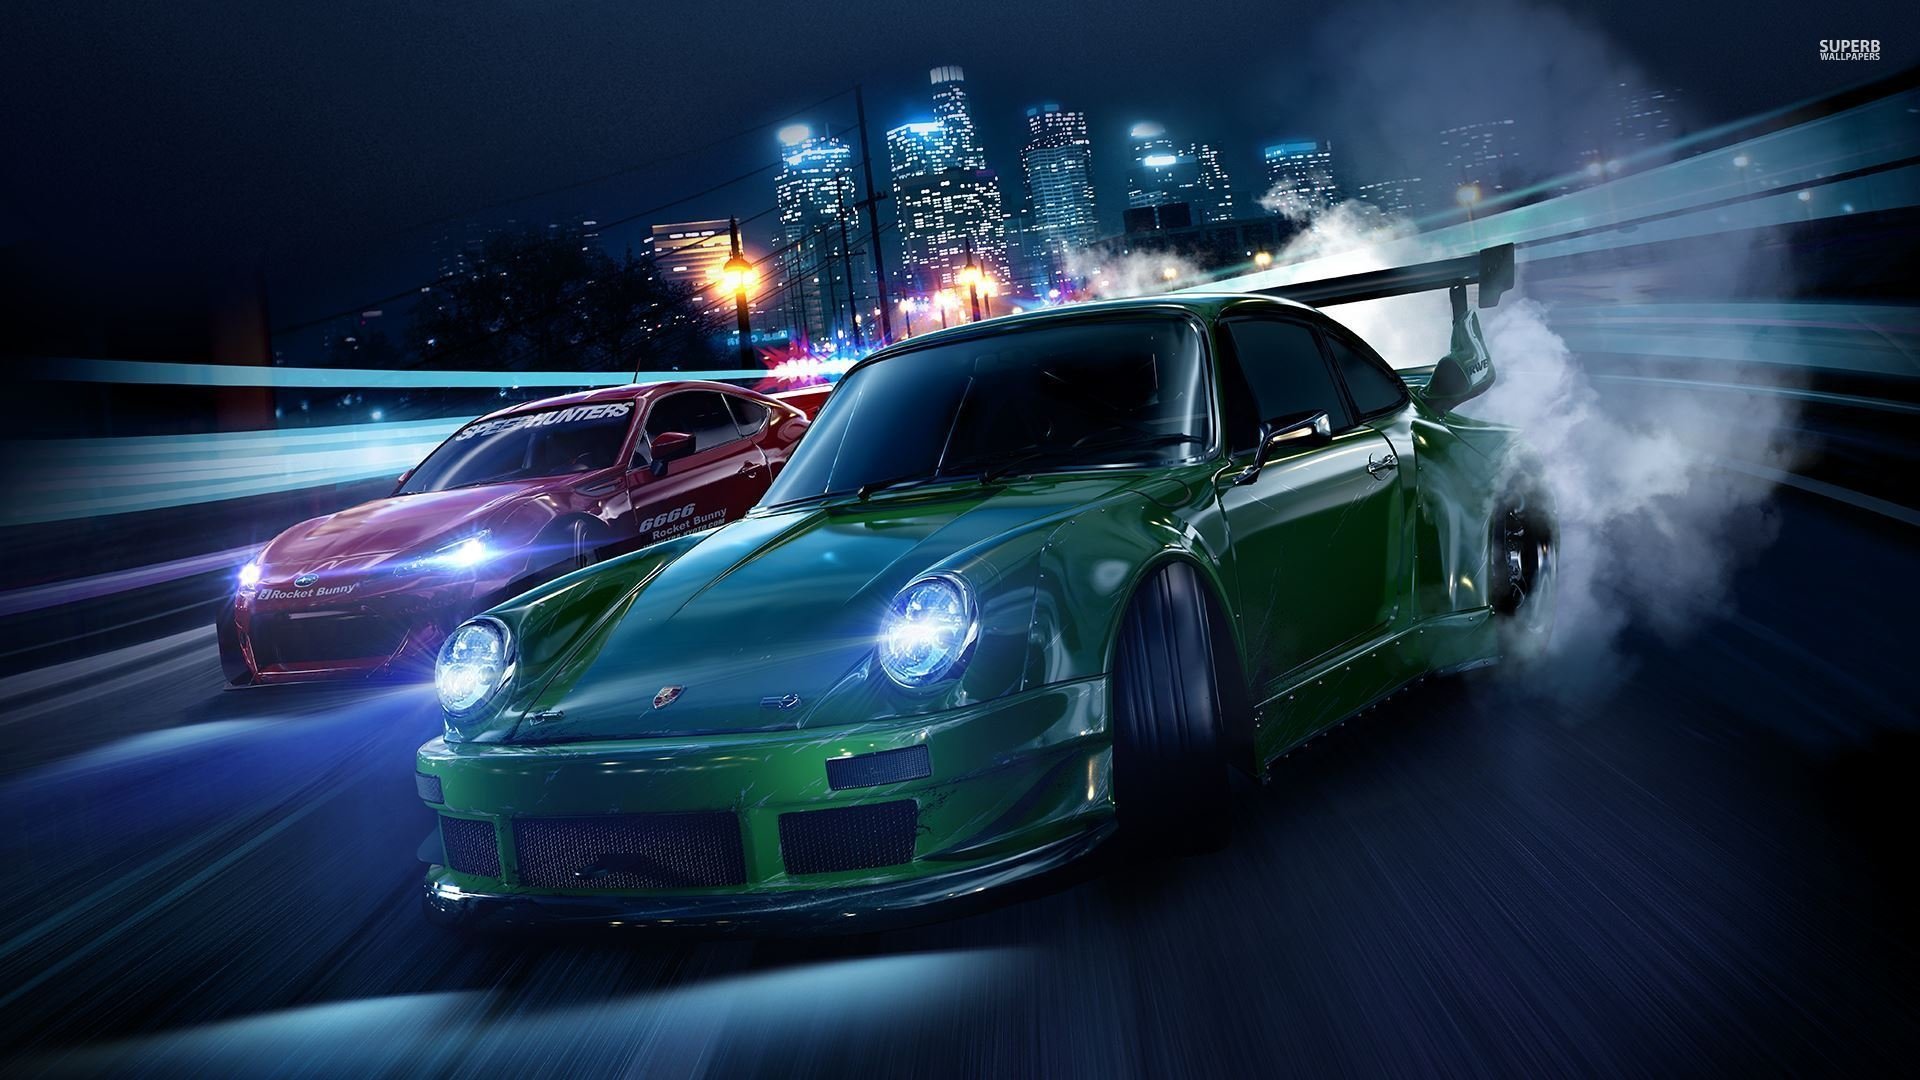 Need for speed wallpaper